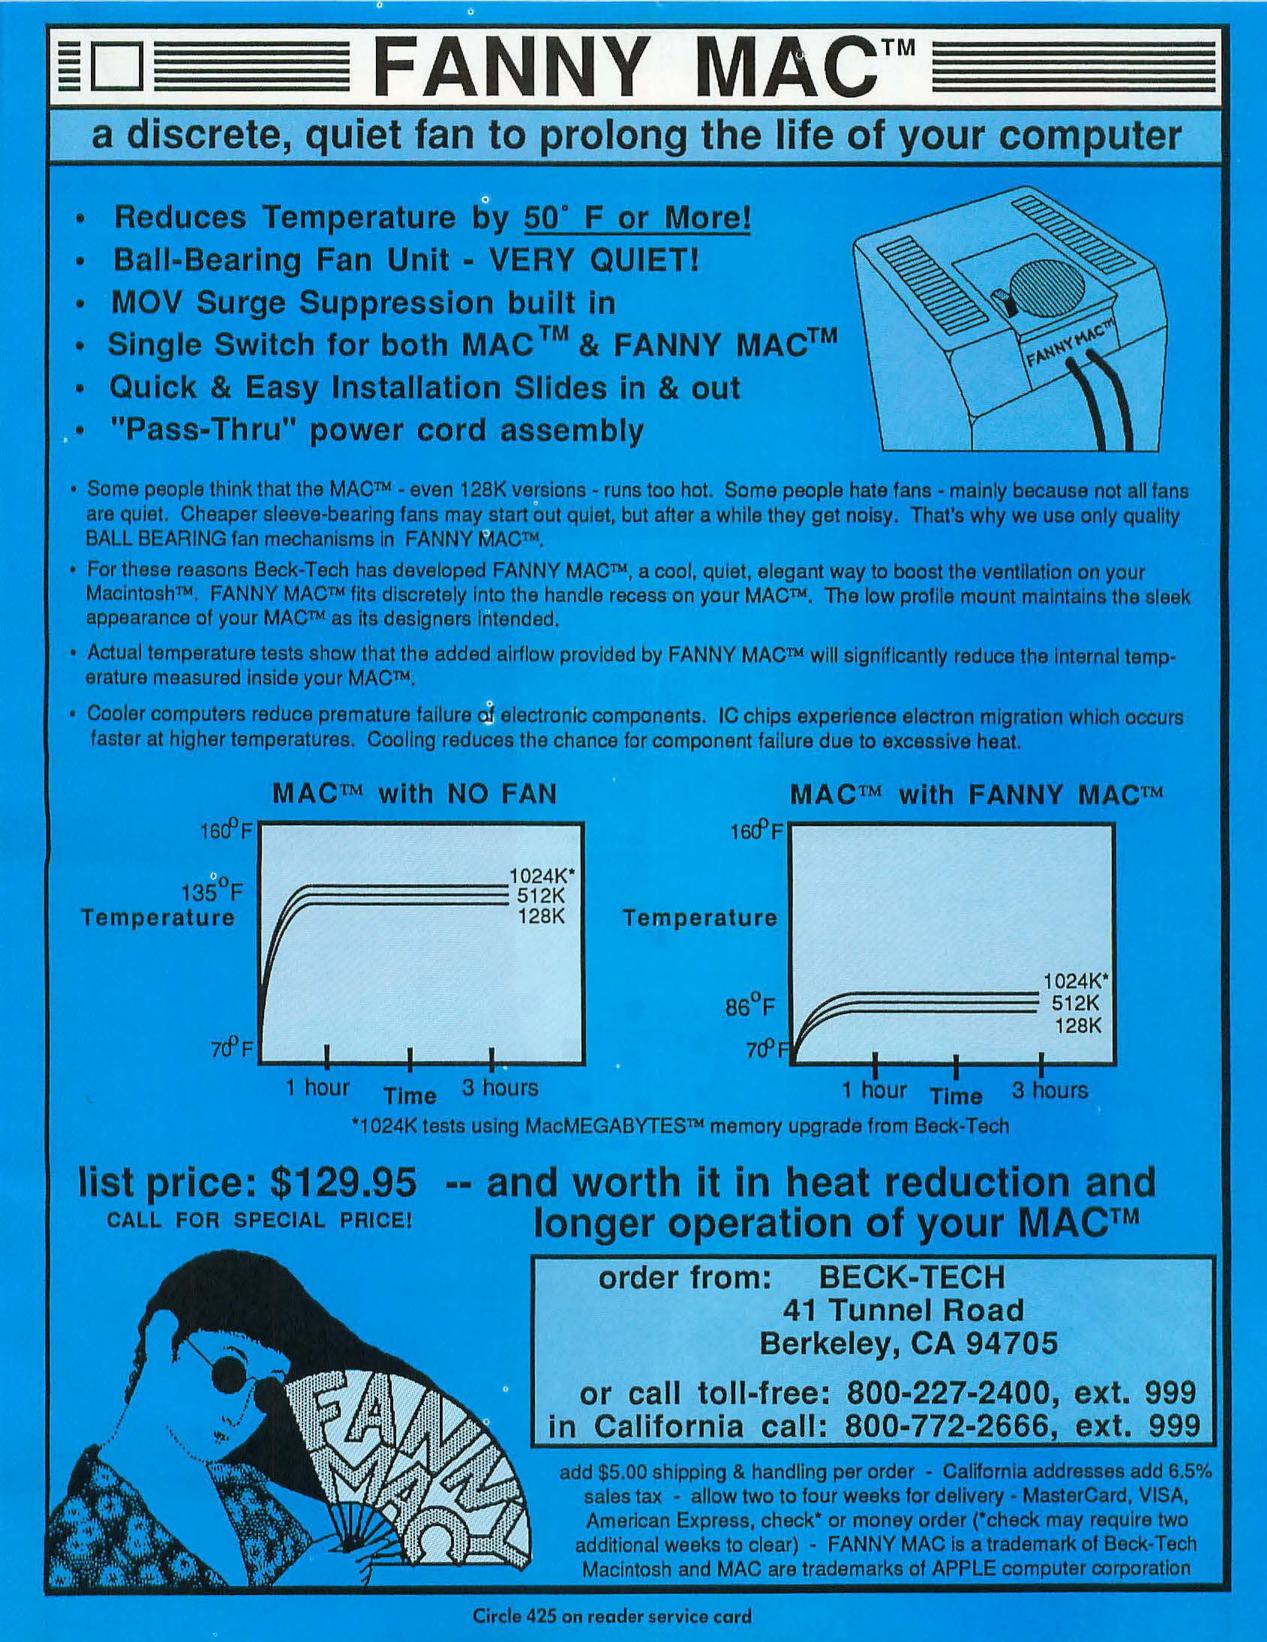 A 1986 magazine advertisement for Fanny Mac, described as “a discrete, quite fan to prolong the life of your computer.